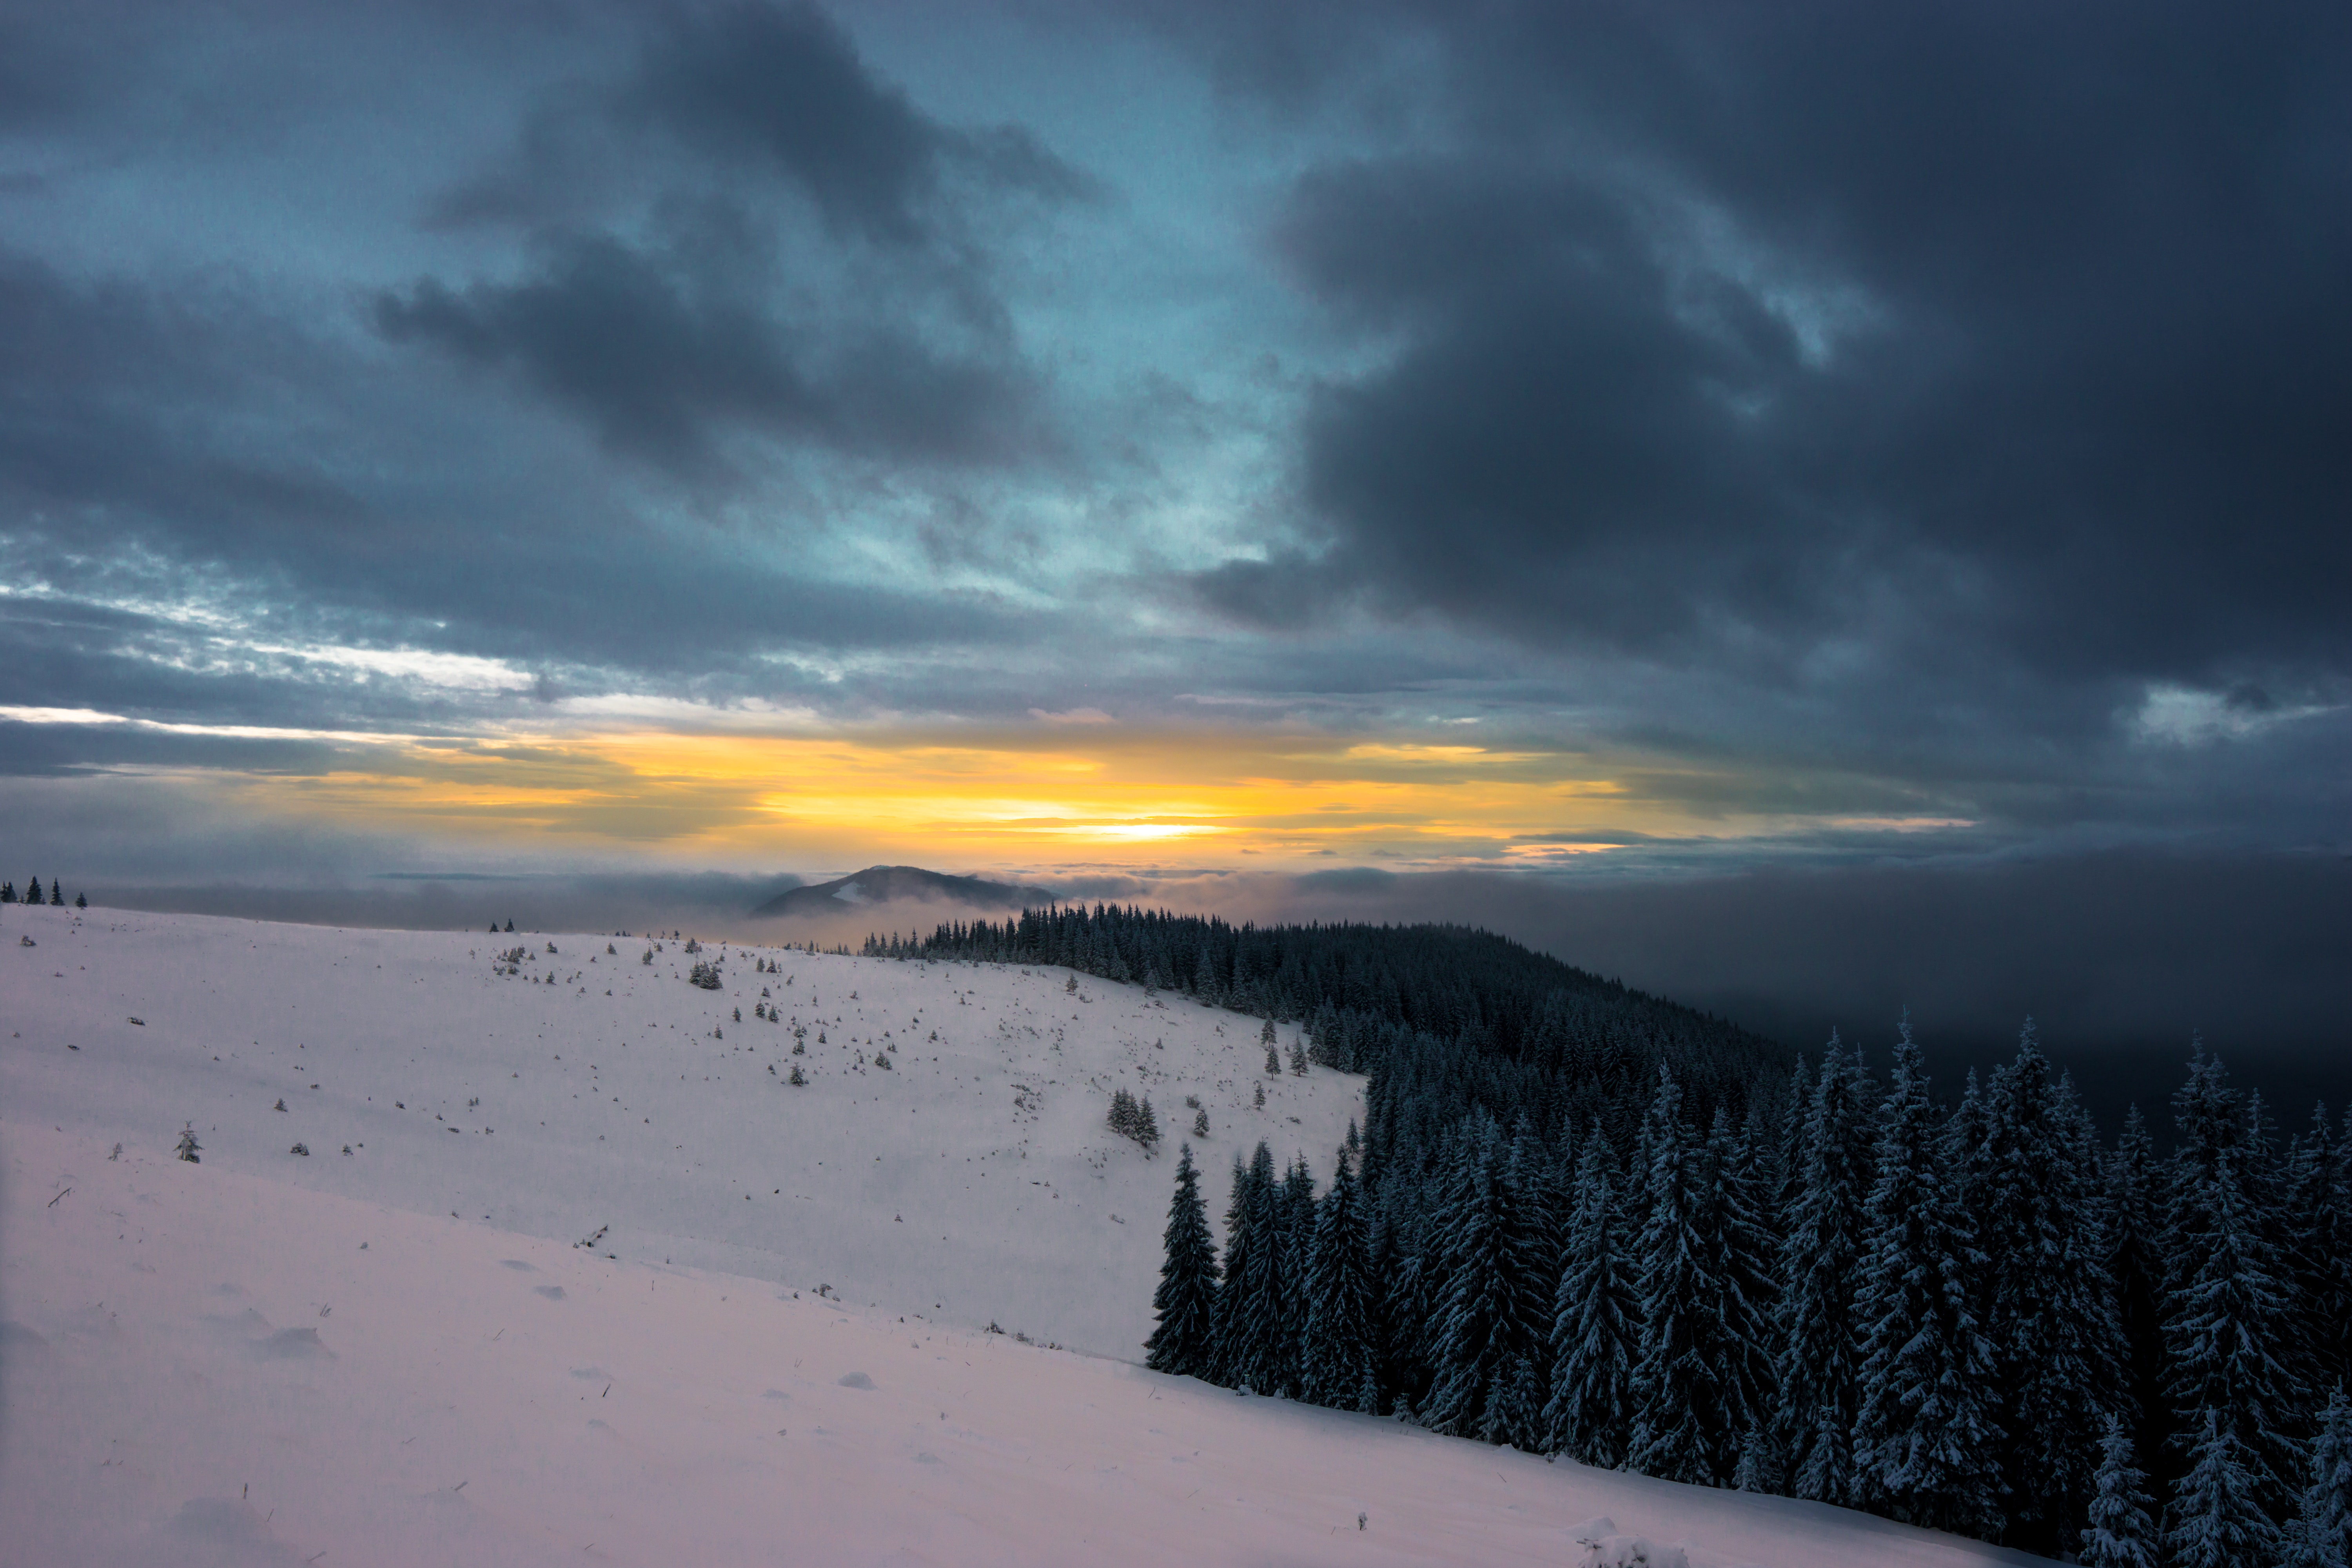 Cool Wallpapers snow, nature, mountains, winter, sunset, sky, clouds, forest, snow covered, snowbound